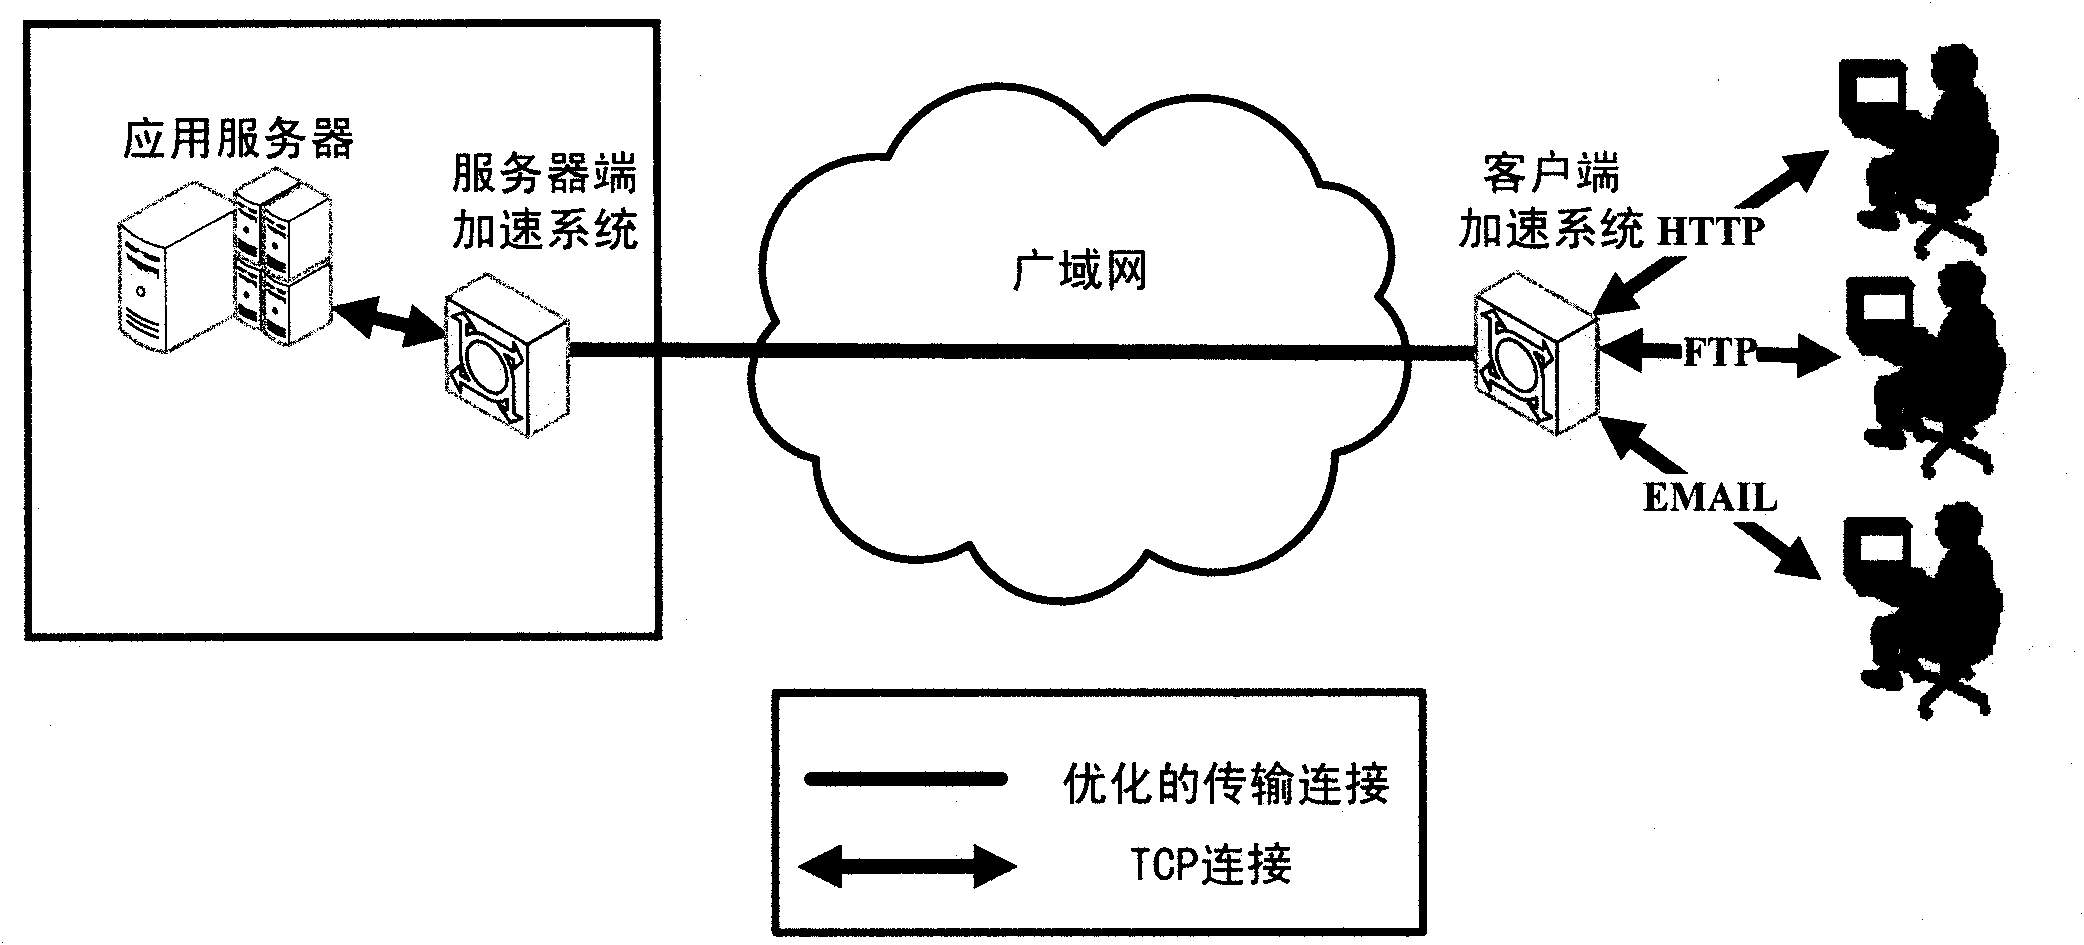 IP (Internet Protocol) network application accelerating system